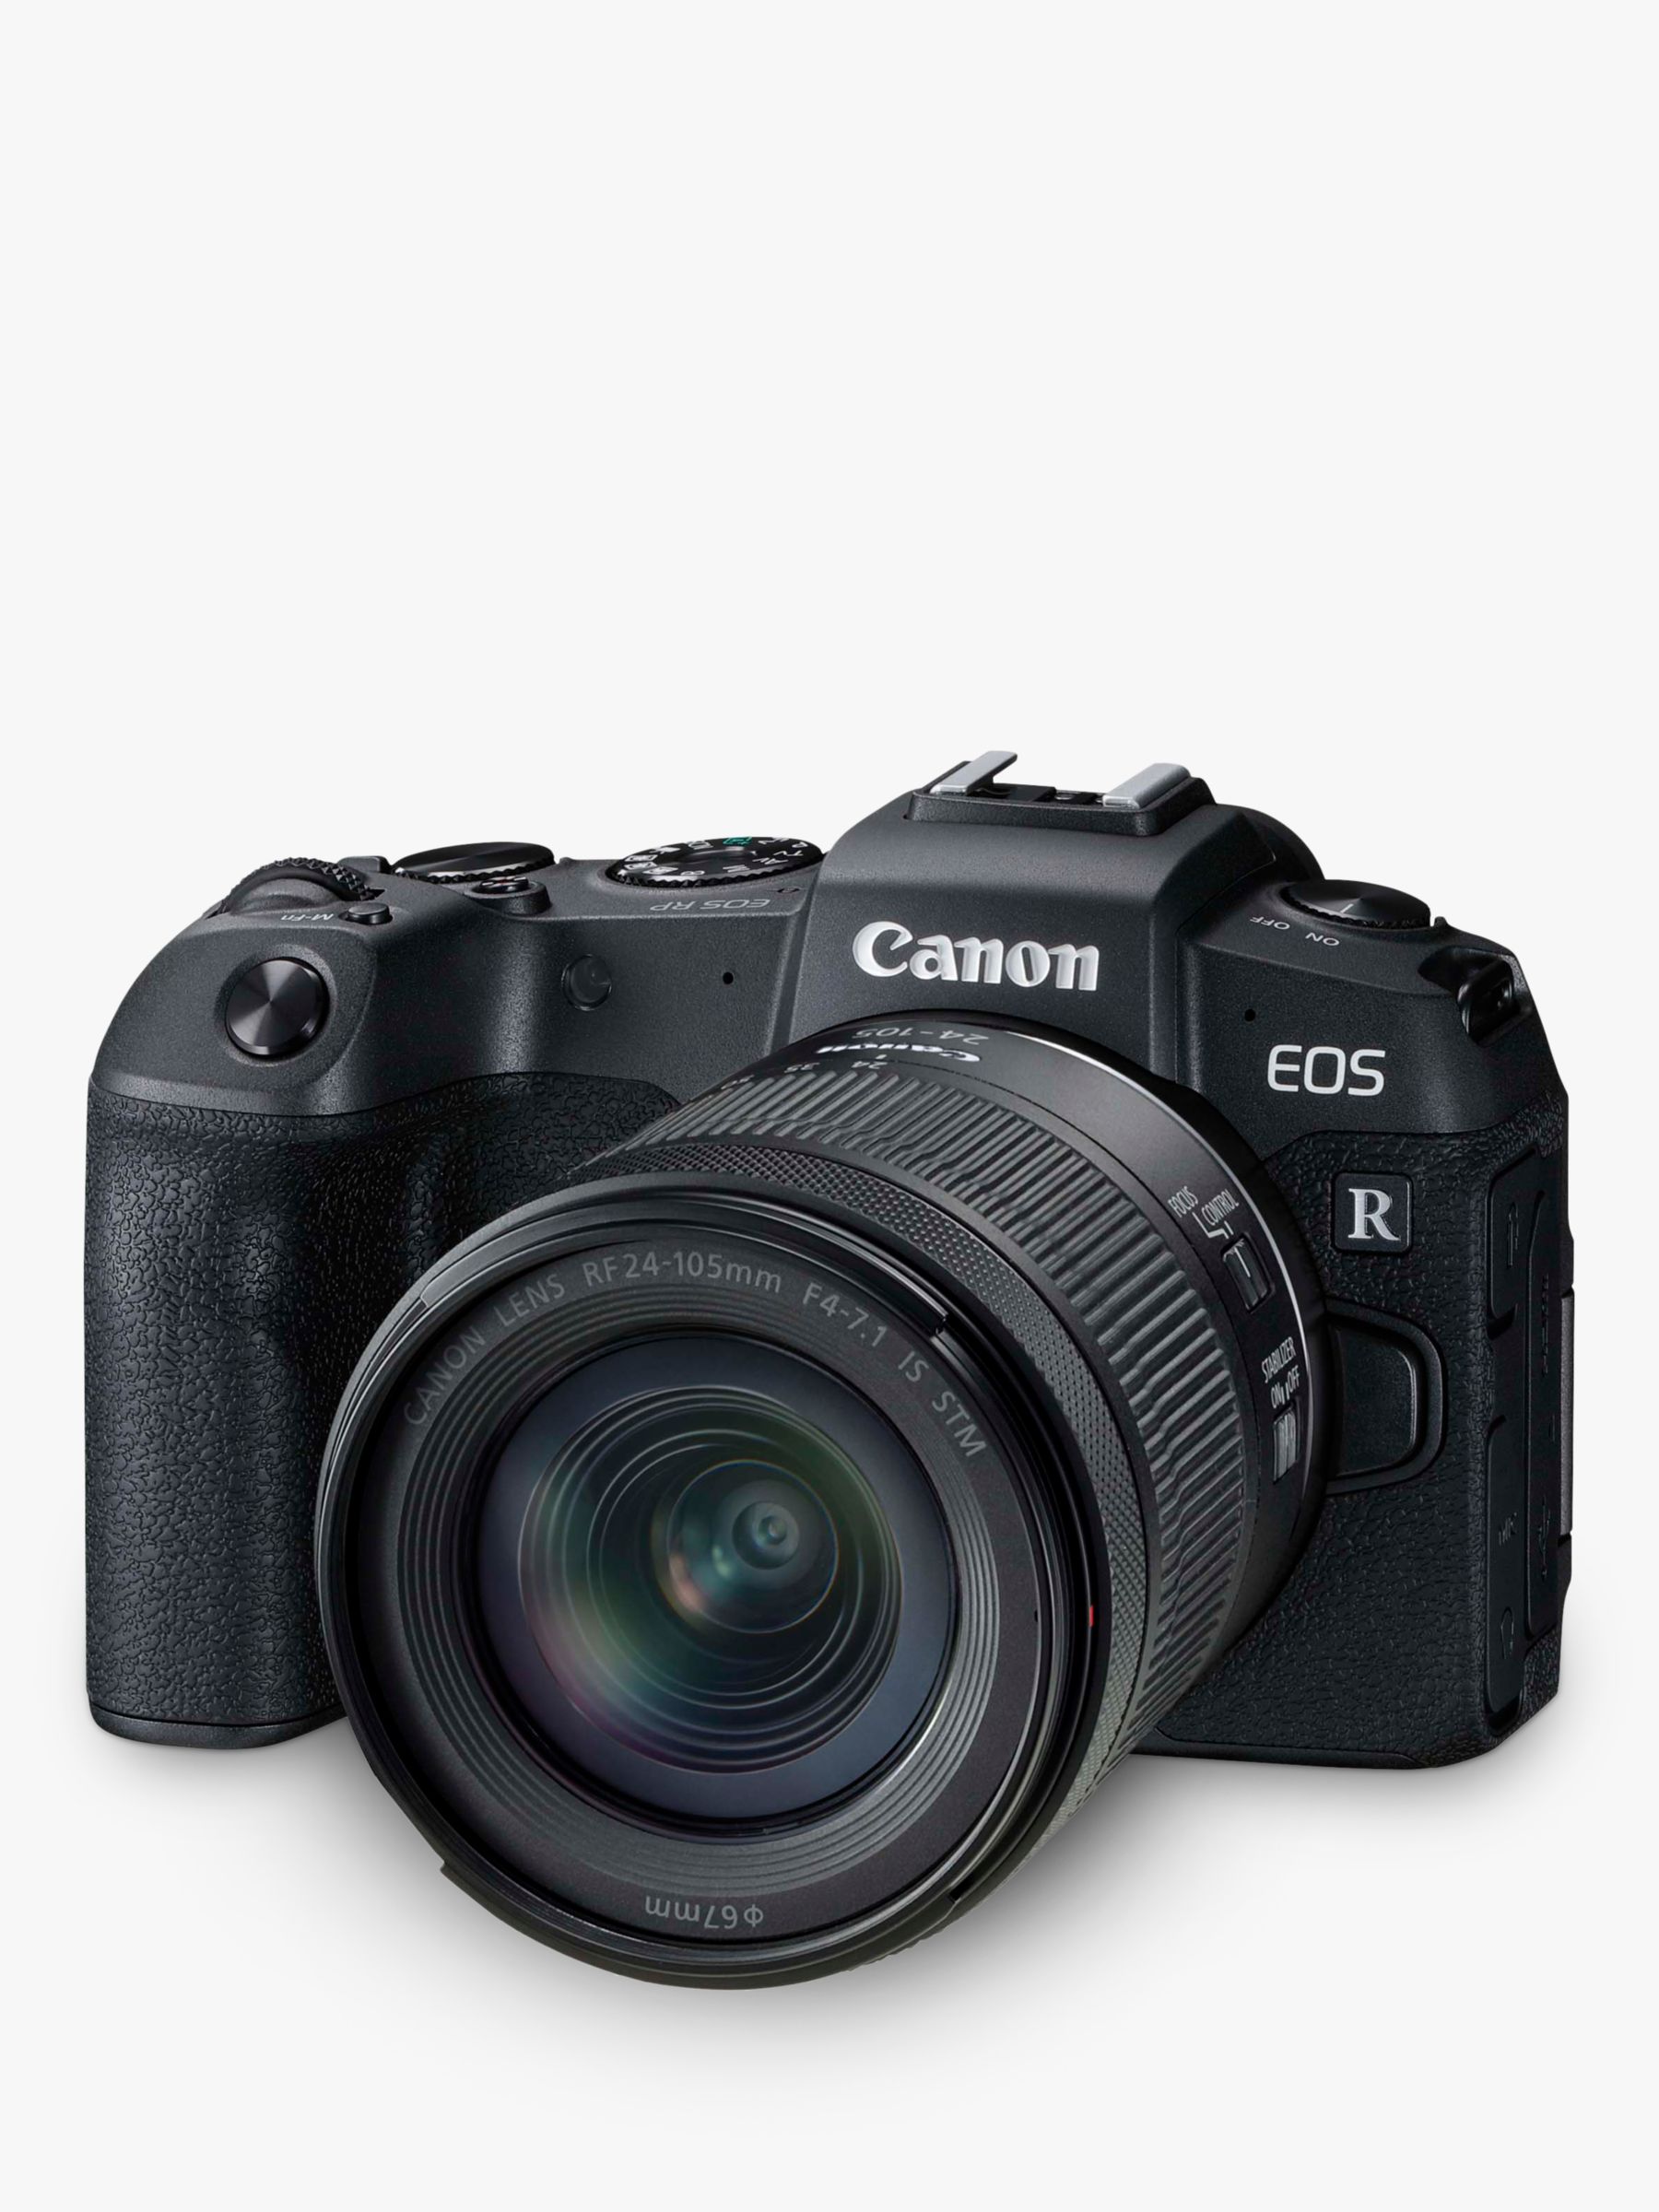 Image of Canon EOS RP Compact System Camera with RF 24105mm IS STM Lens 4K Ultra HD 262MP WiFi Bluetooth OLED EVF 3 VariAngle Touch Screen